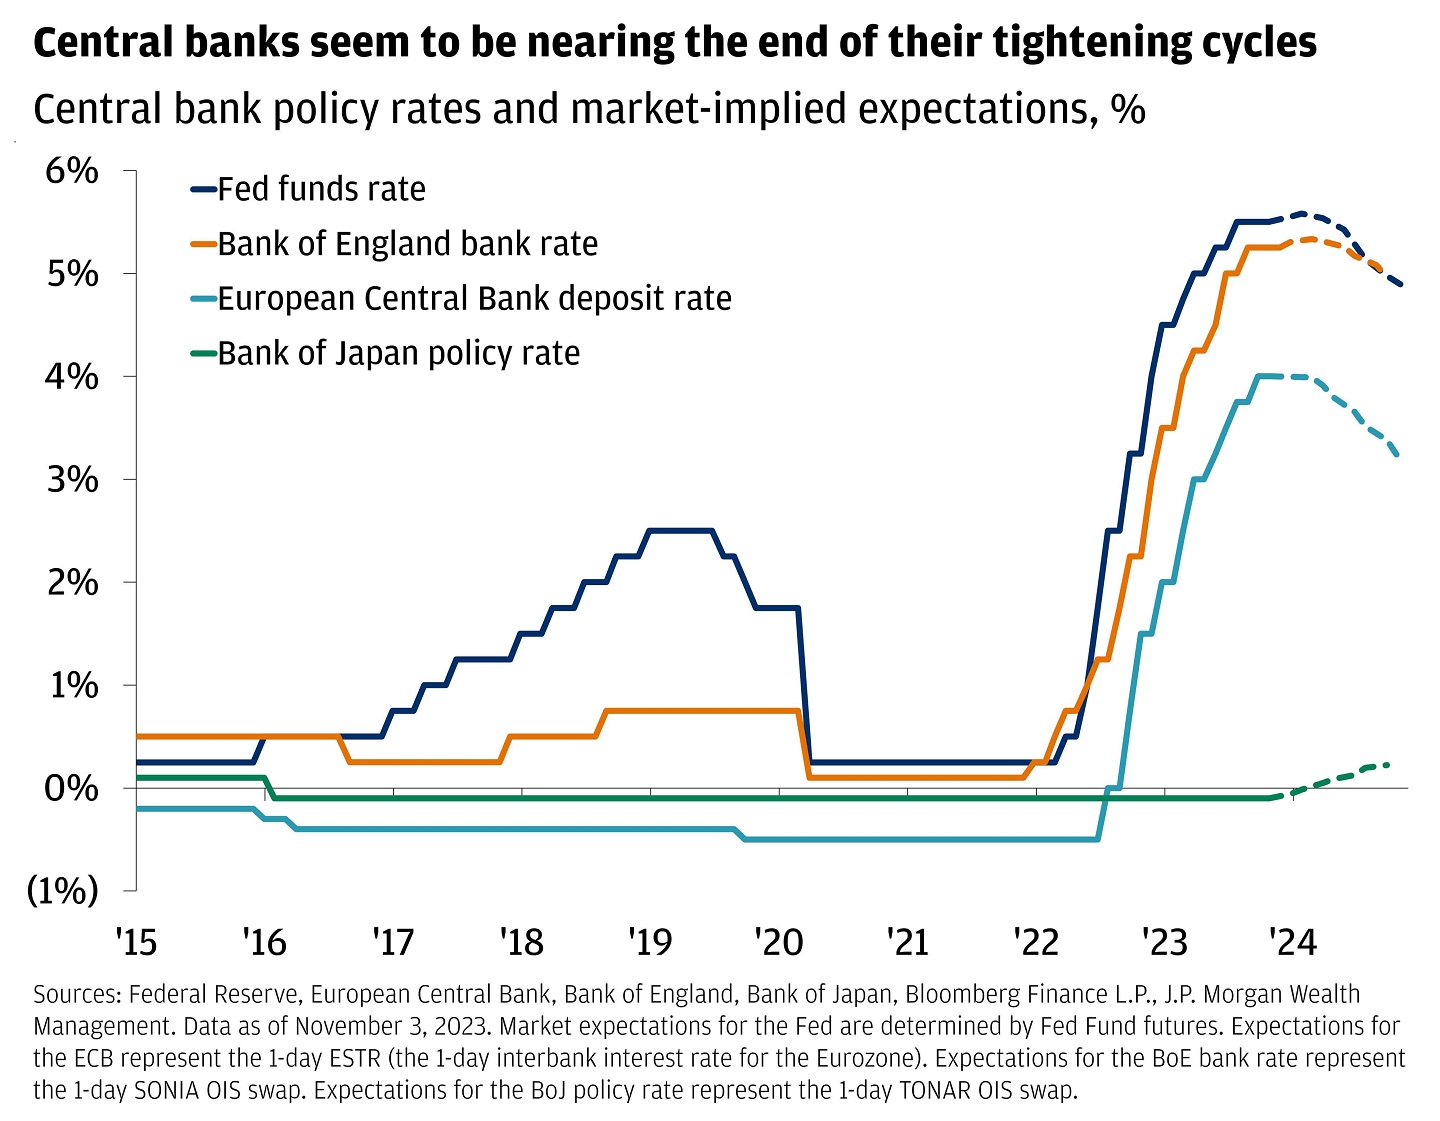 The line graph shows the historical and implied policy rates across 4 central banks: the Federal Reserve, the Bank of England, the European Central Bank, and the Bank of Japan.